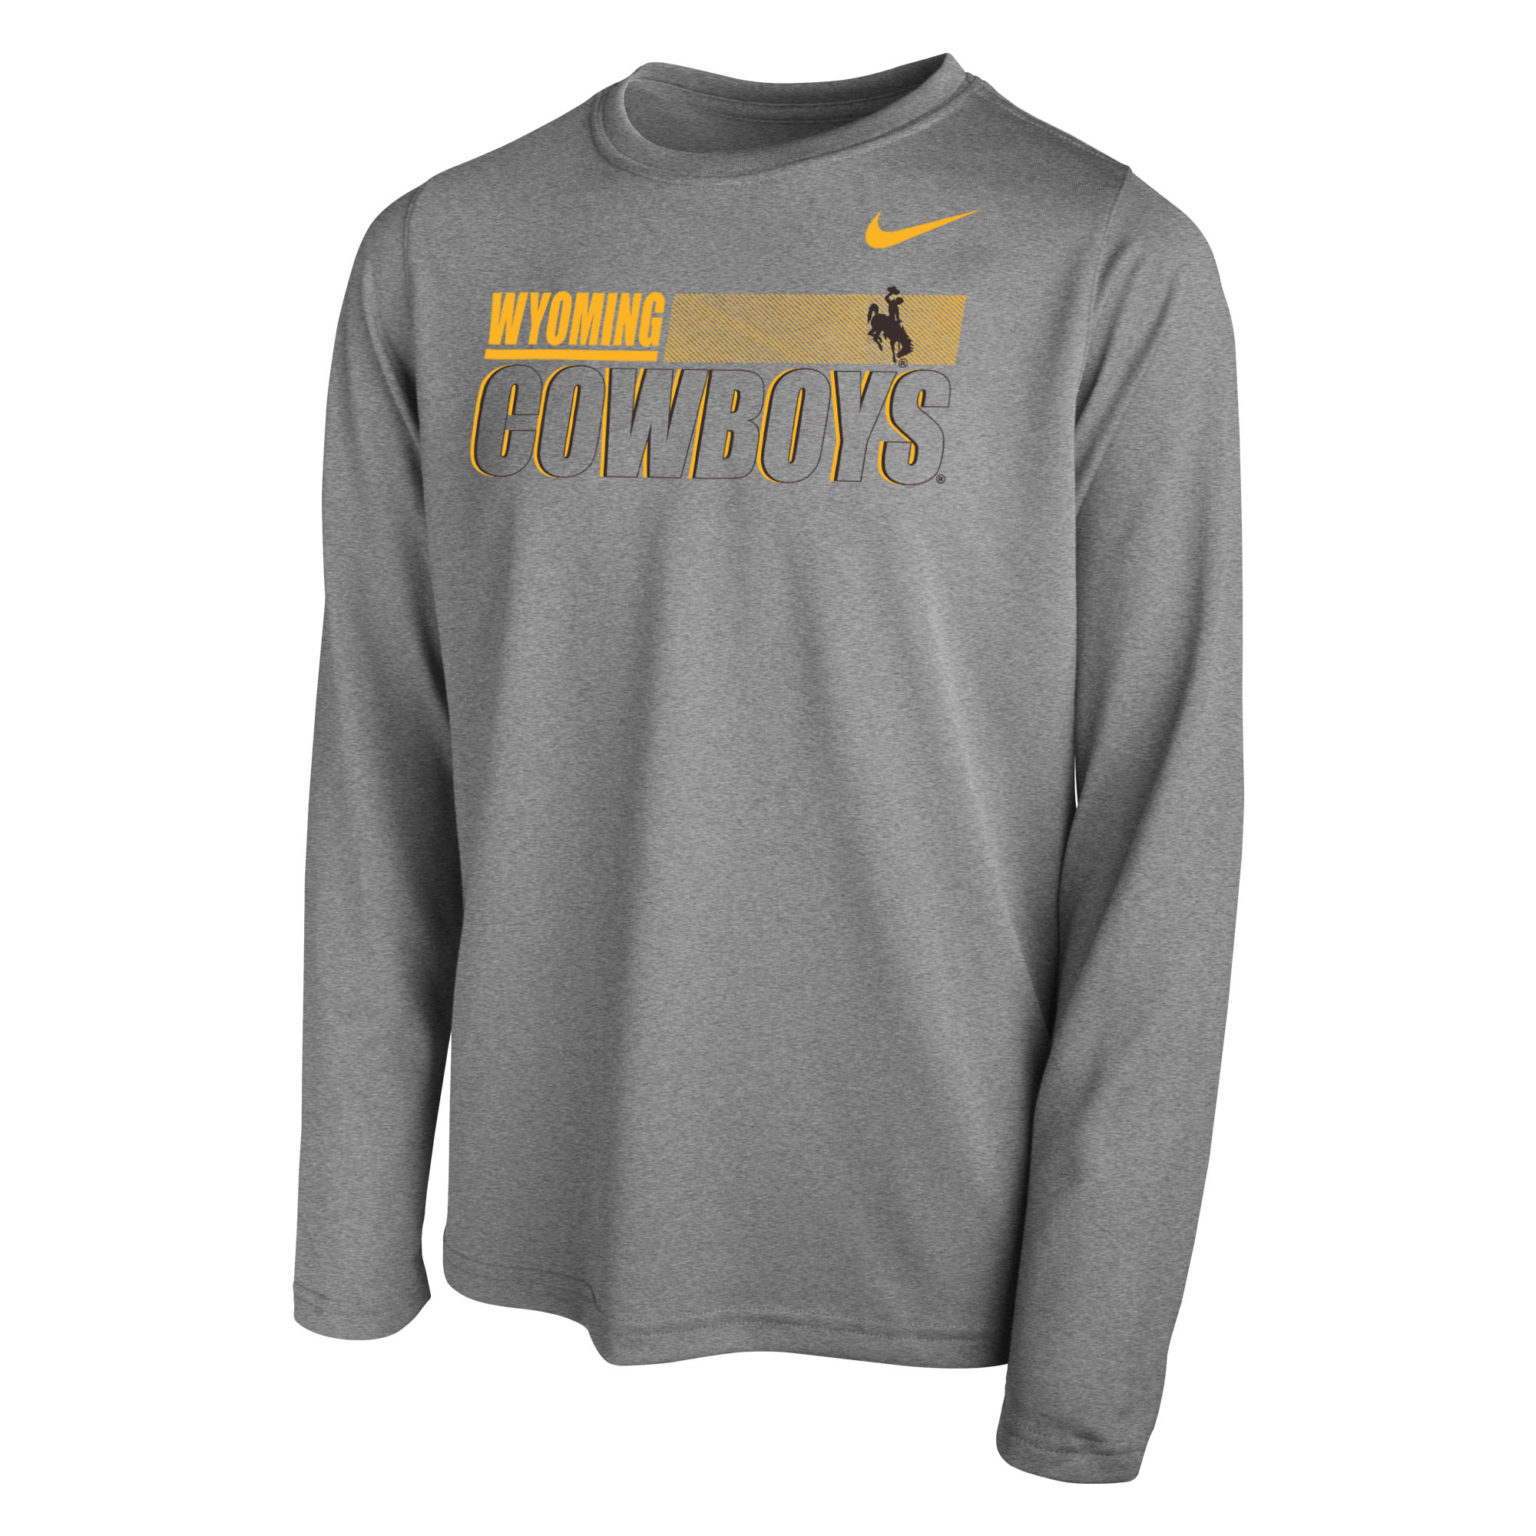 Nike Products - Wyoming Cowboys Gear | Brown and Gold Outlet